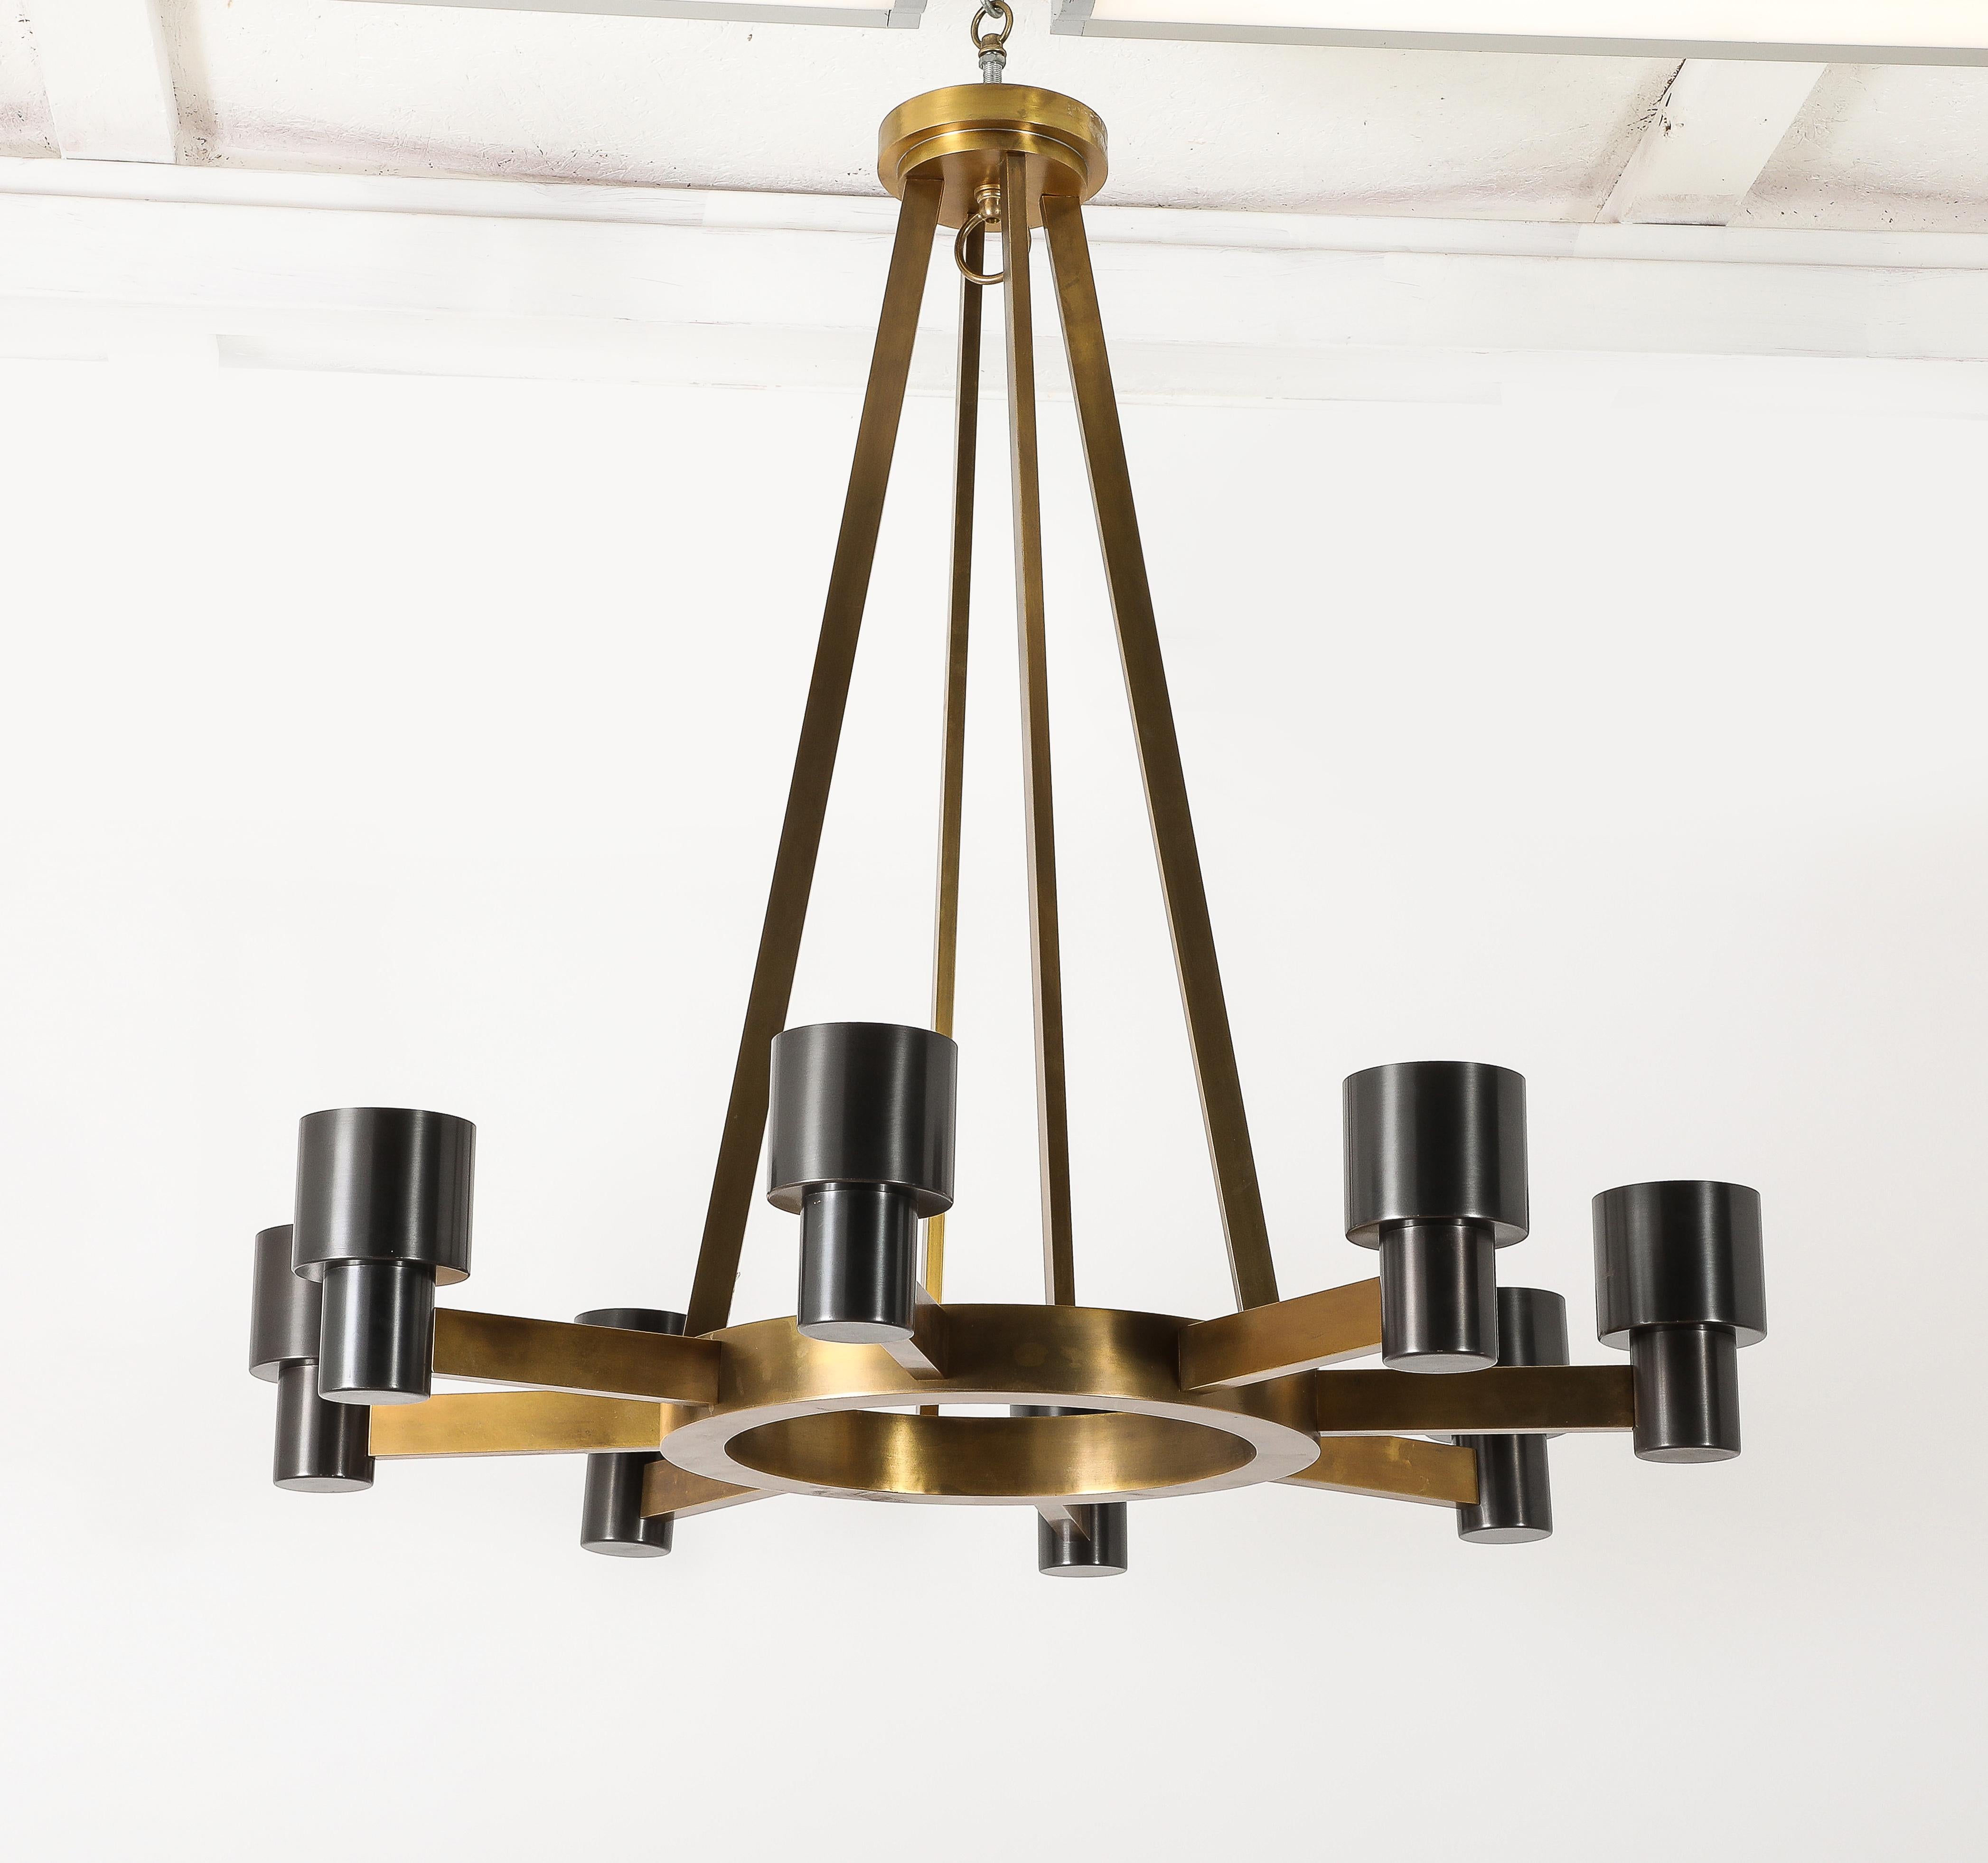 Mixed Metal Brutalist Mid-Century Chandelier Custom Reproduction, USA 2018 For Sale 2